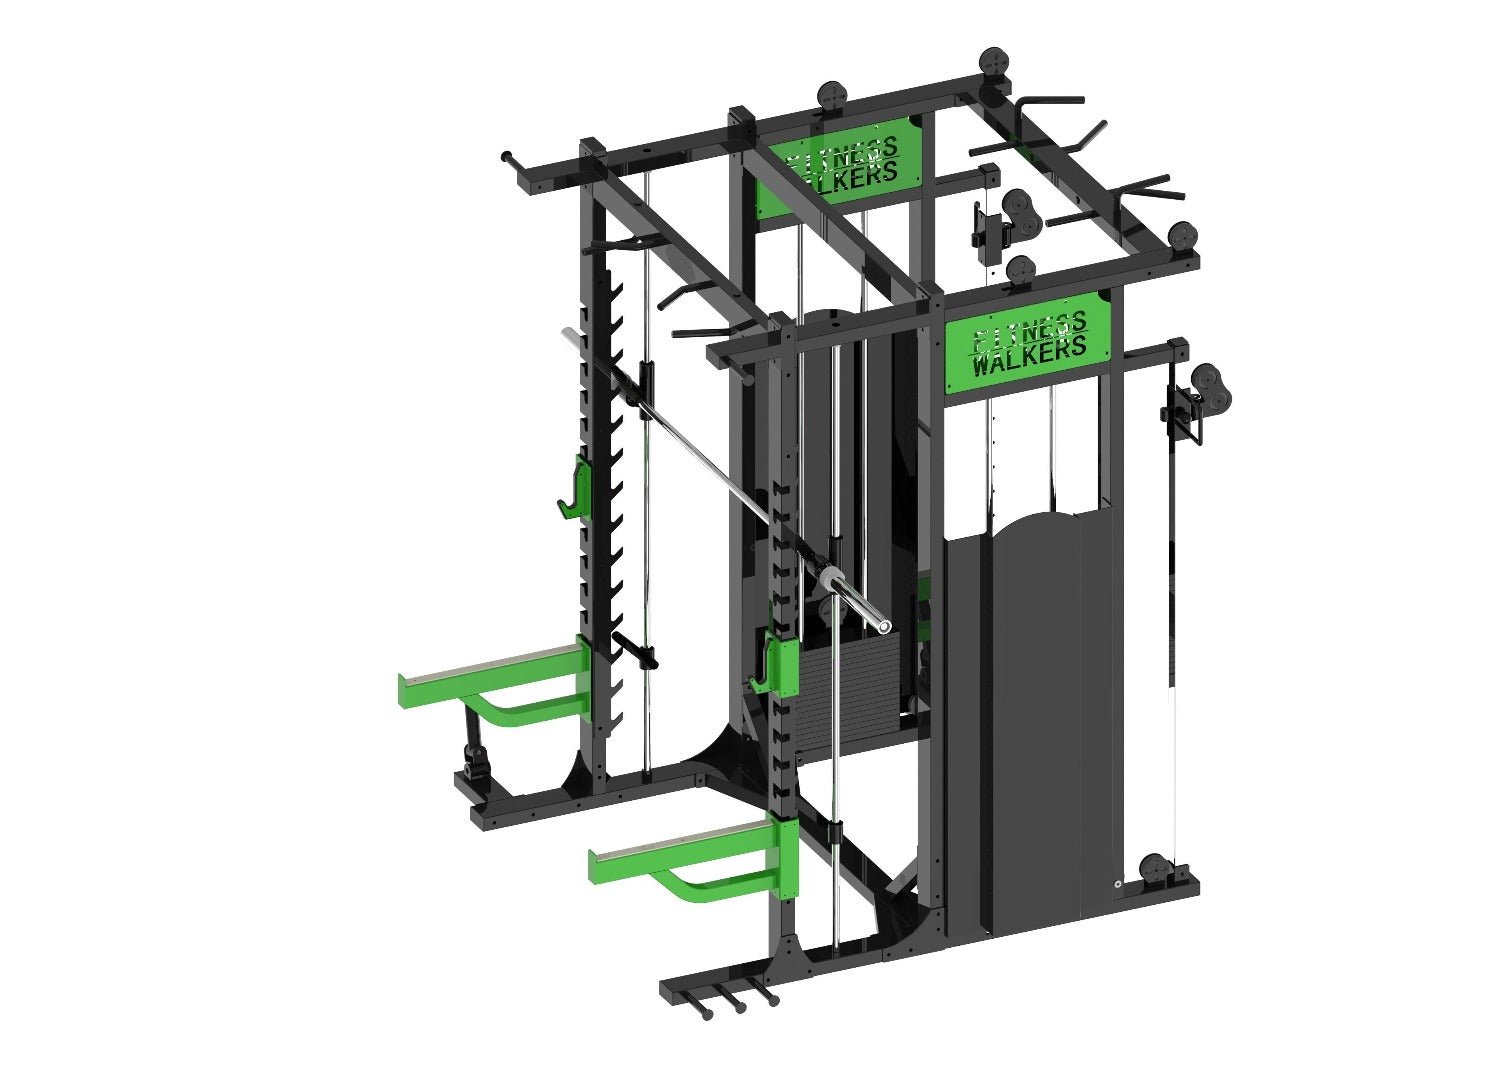 GND Cable Machine & Smith Machine // Lime Green - Rig & Rack- GND Fitness